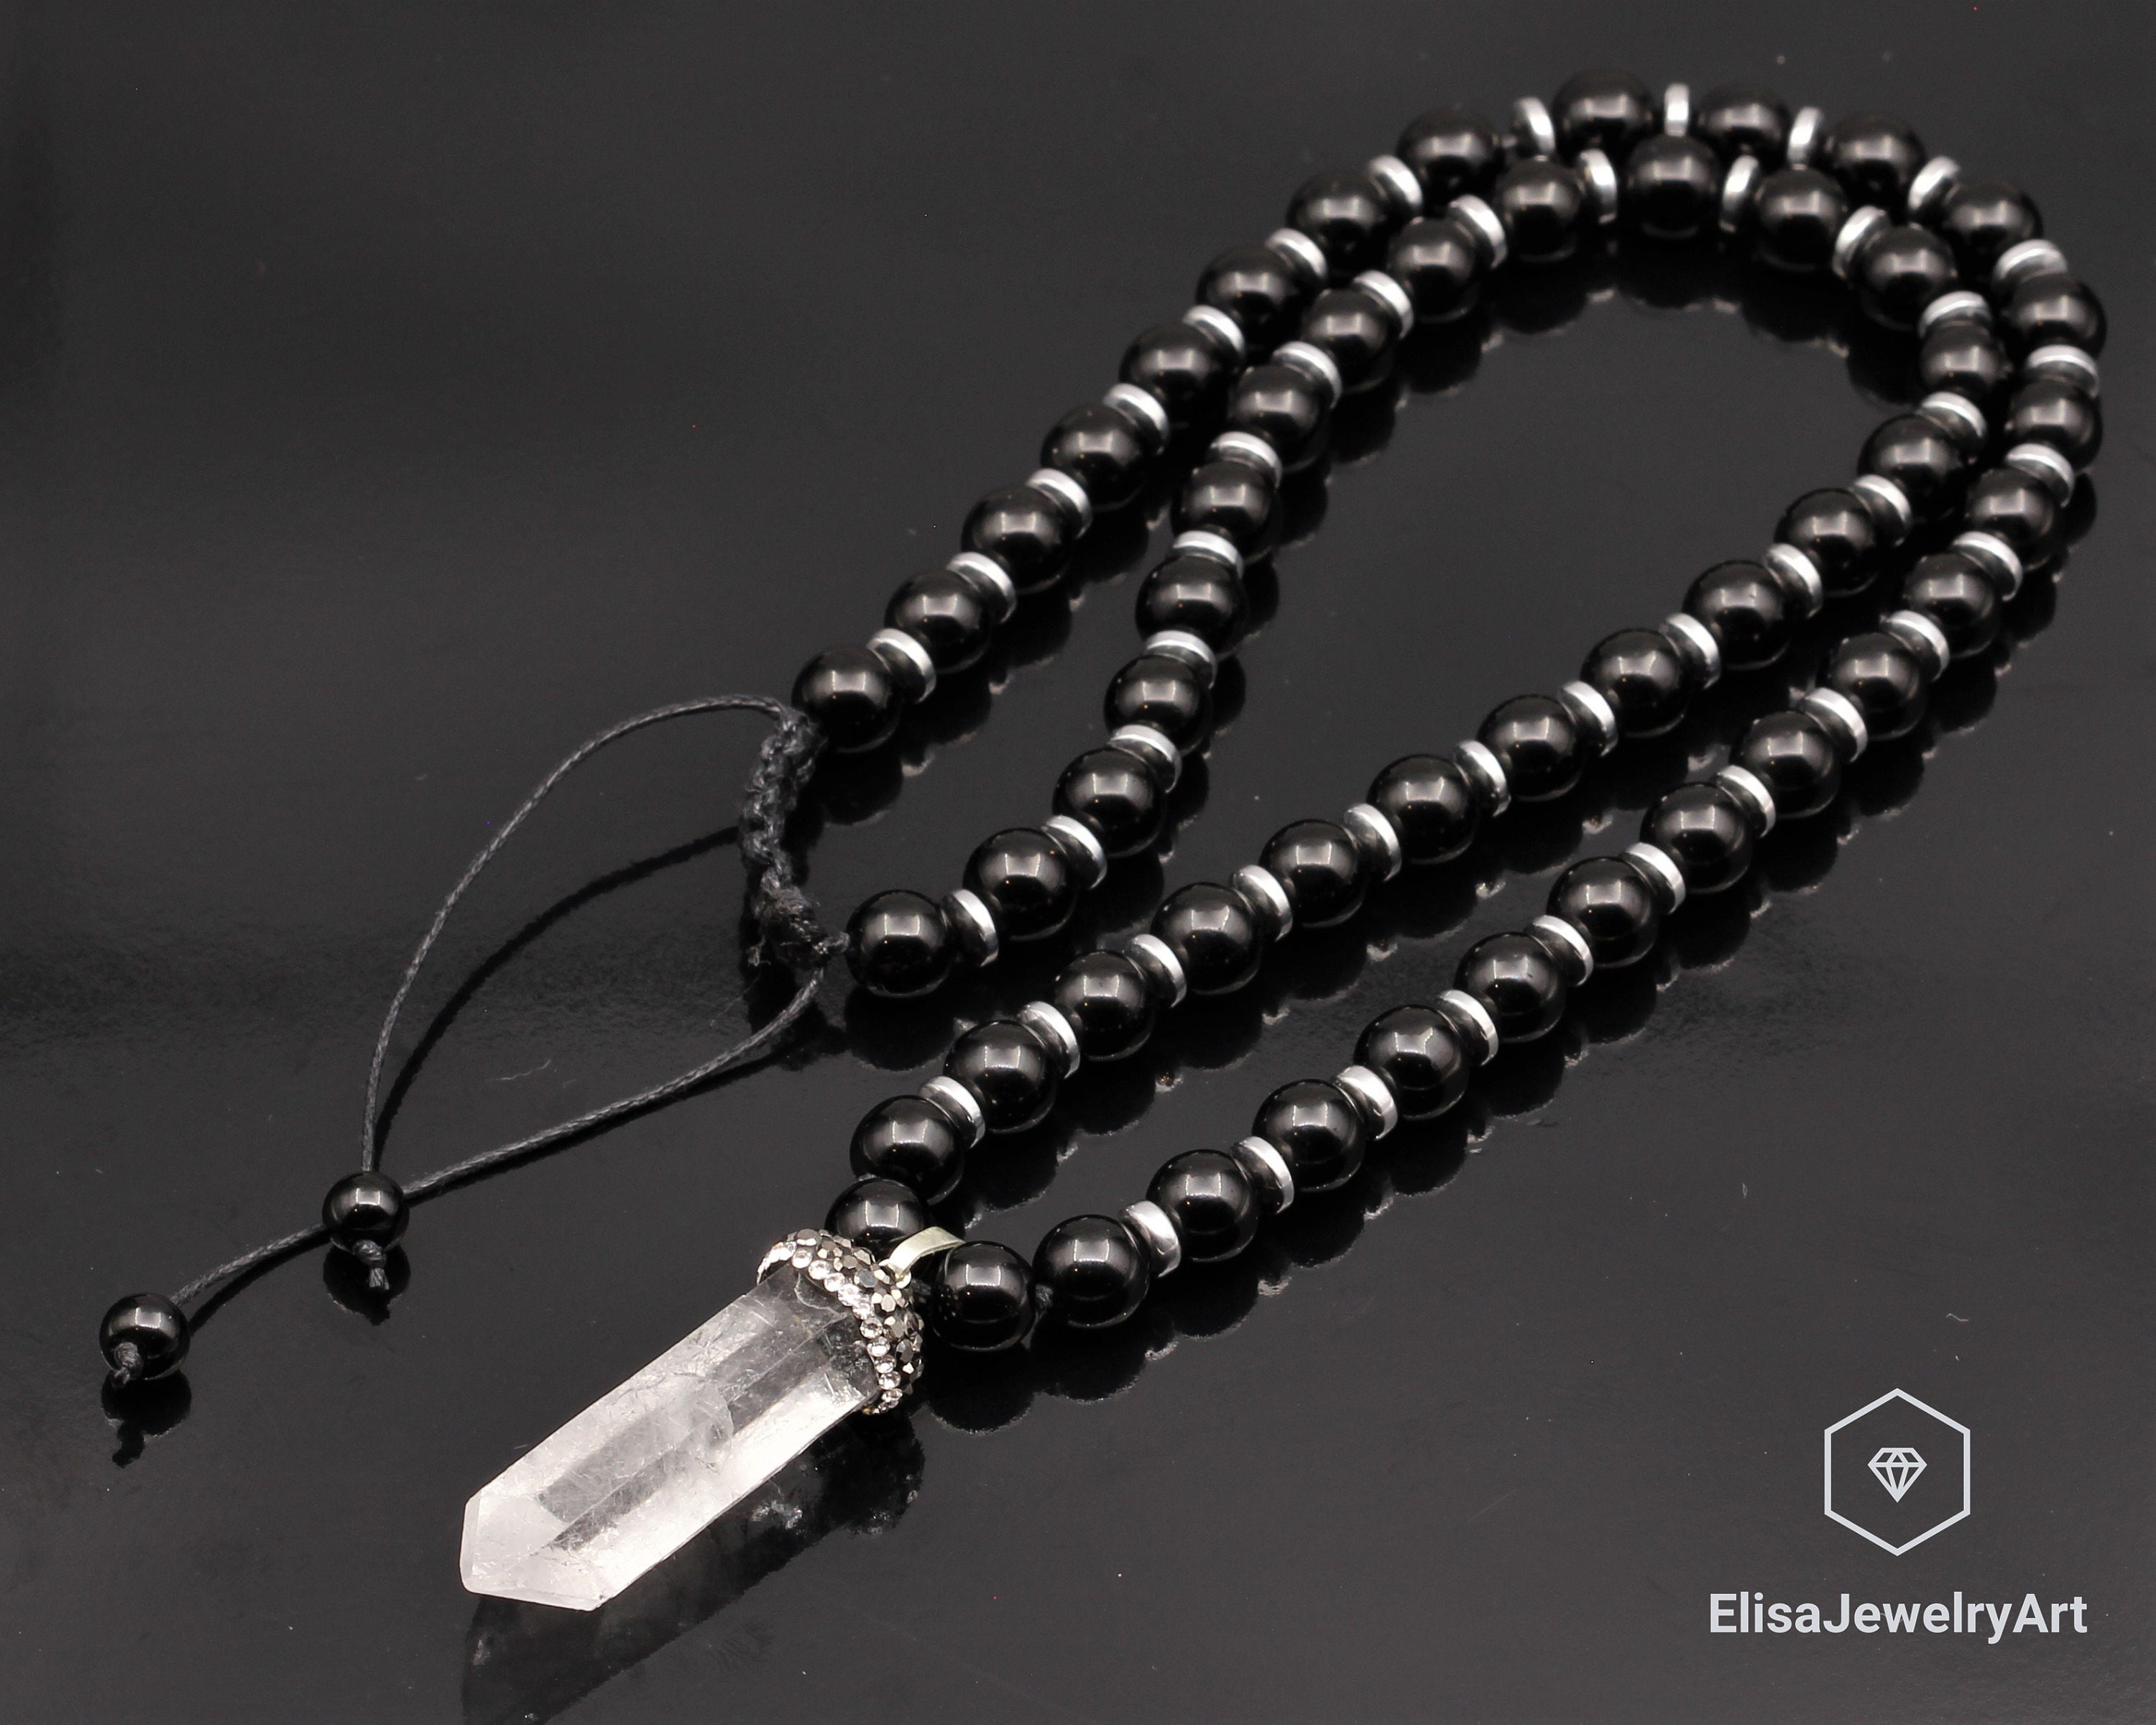 Black Lava Rock Necklace | Natural Strength & Courage - Luck Strings Black Wax Cotton